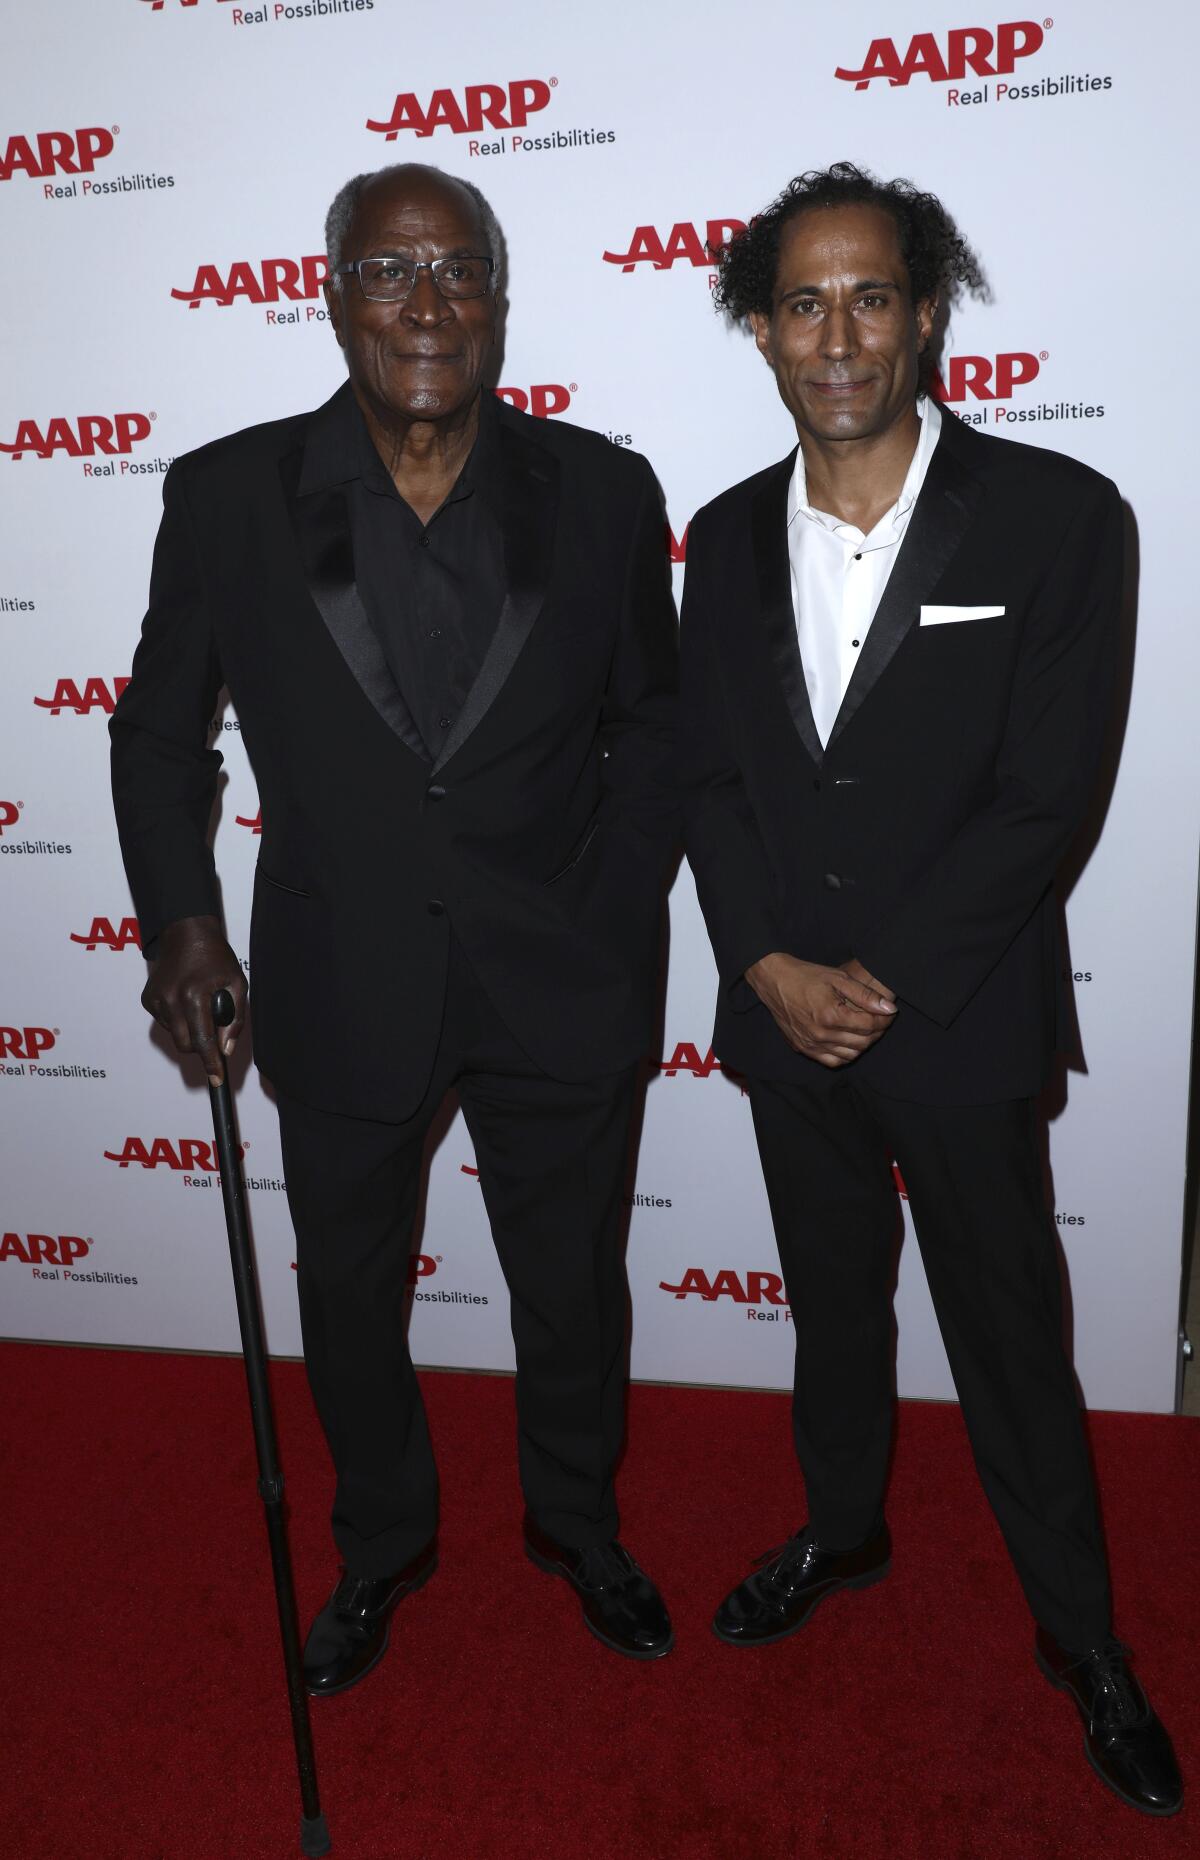 John Amos, left, and son K.C. Amos pose together on a red carpet in black formal attire